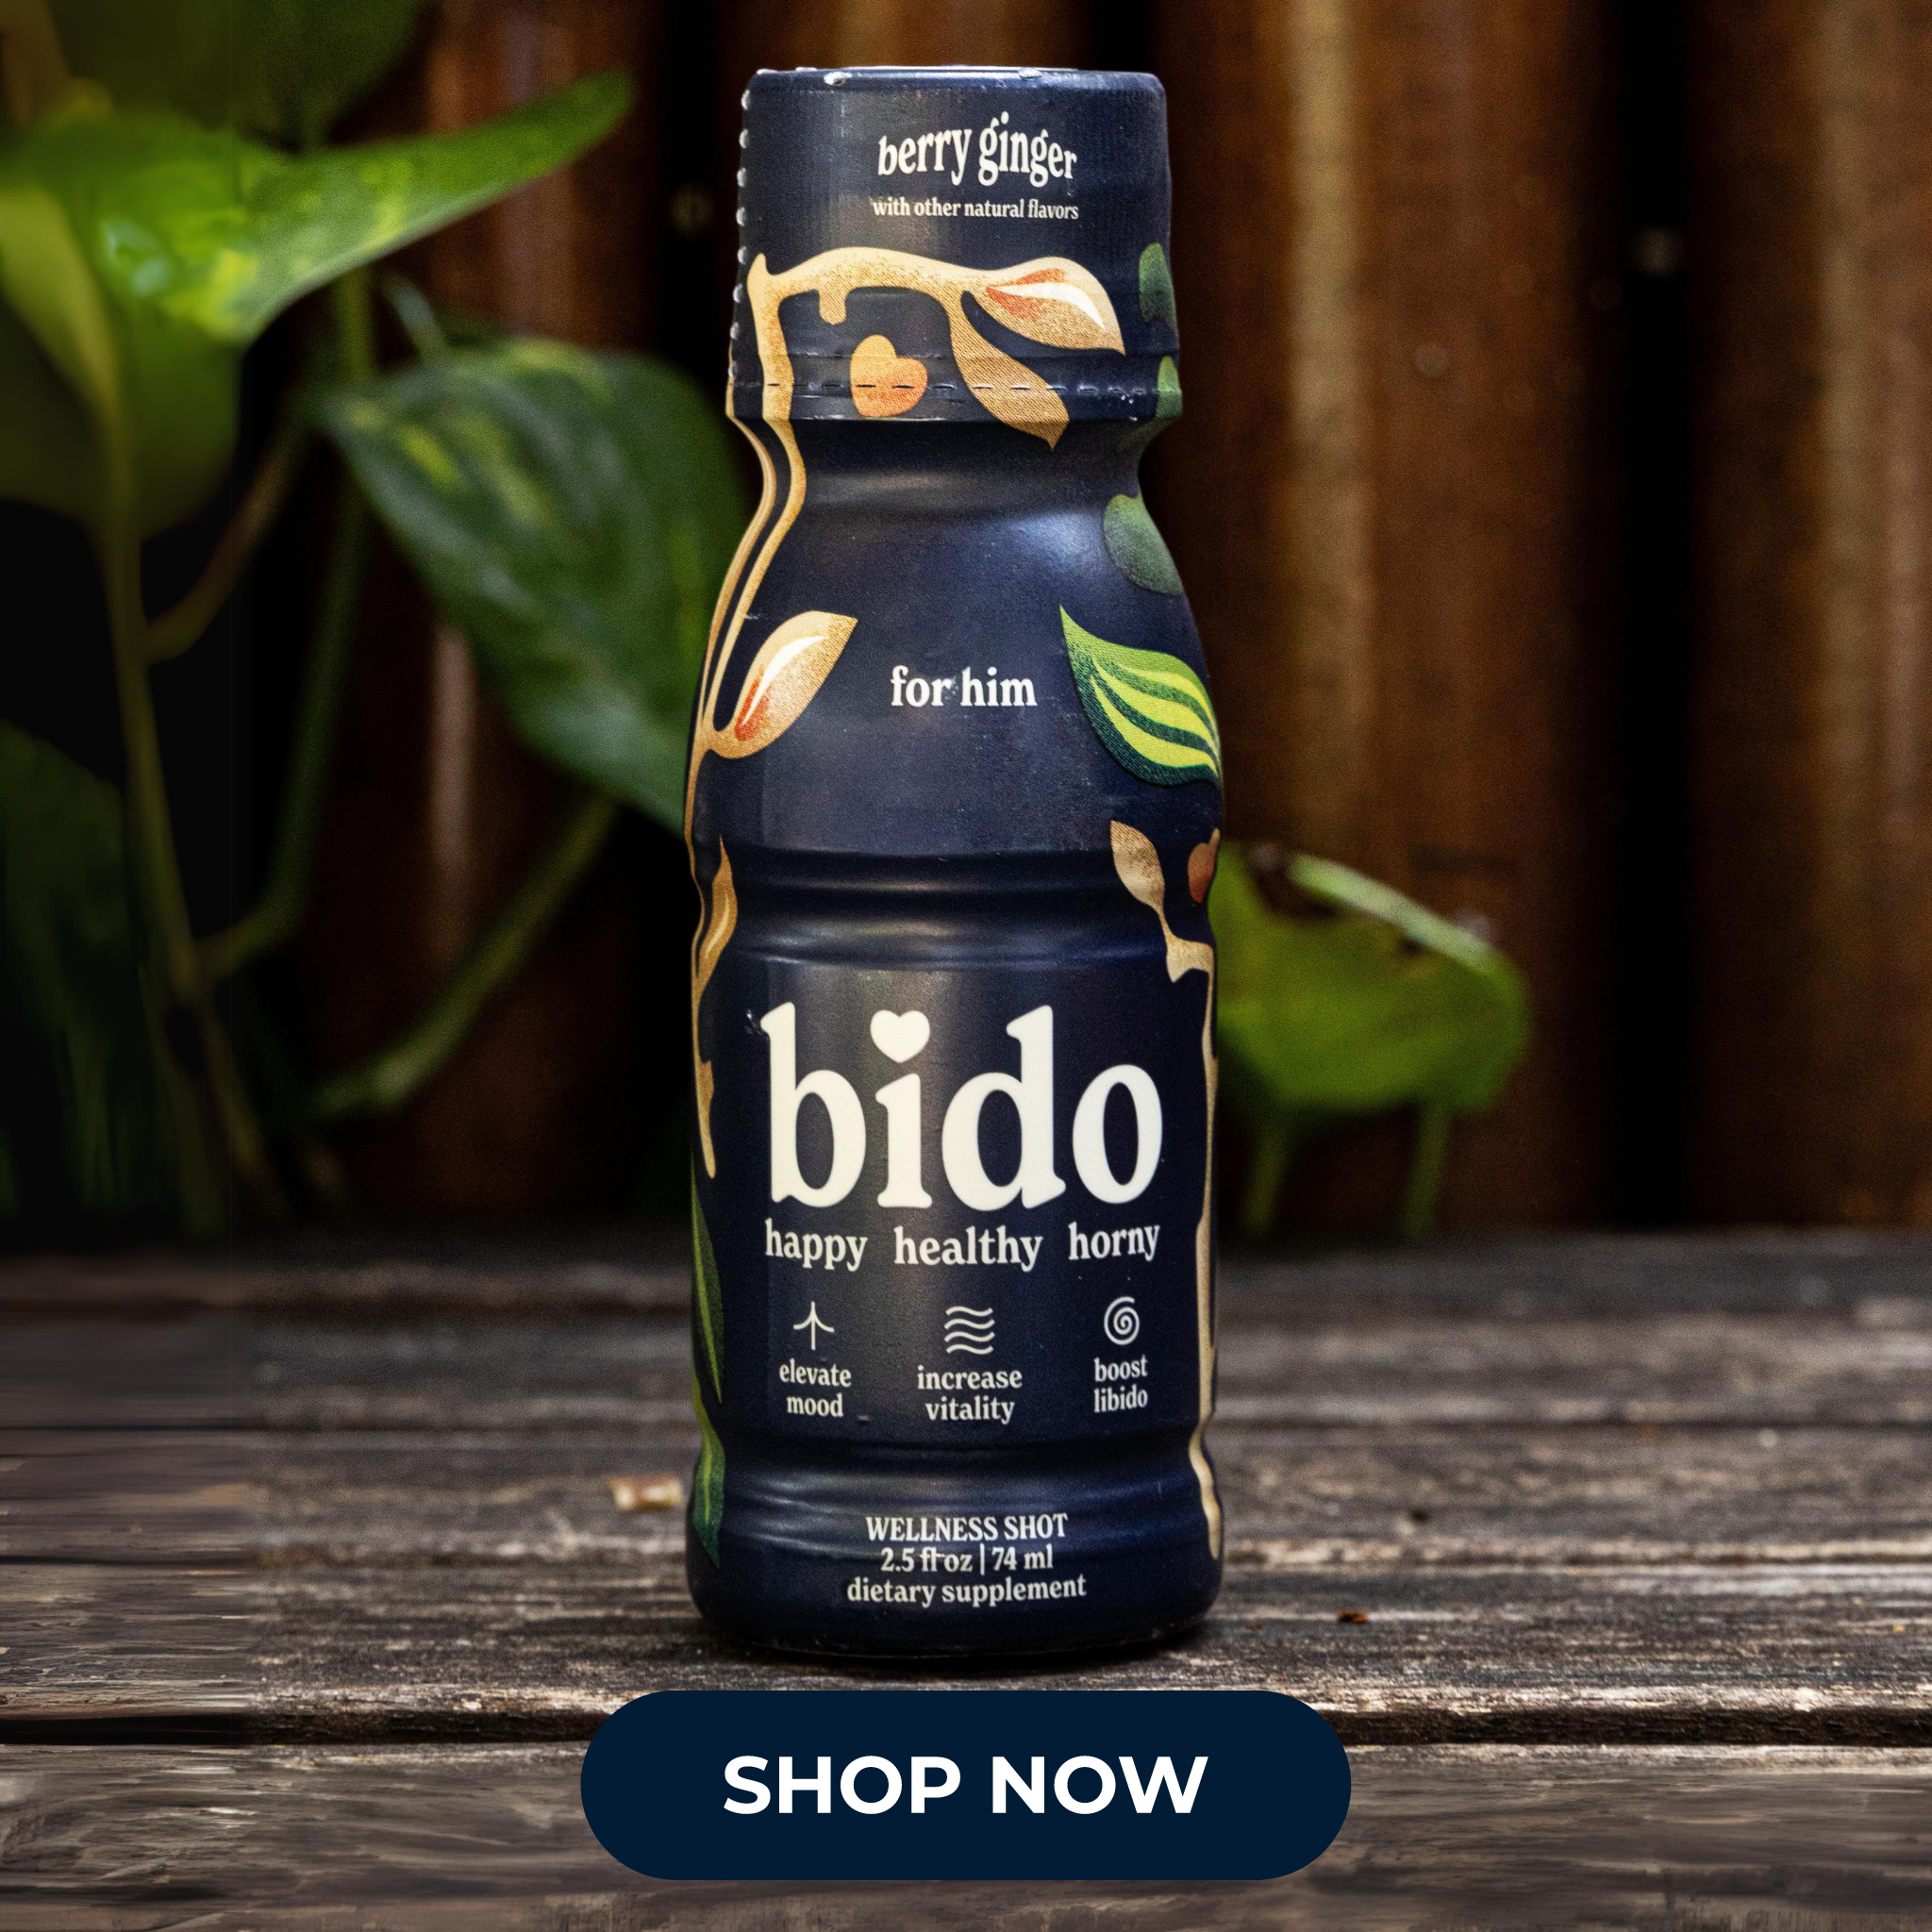 A bottle of 'bido' wellness shot on a wooden surface with a 'Shop Now' button.